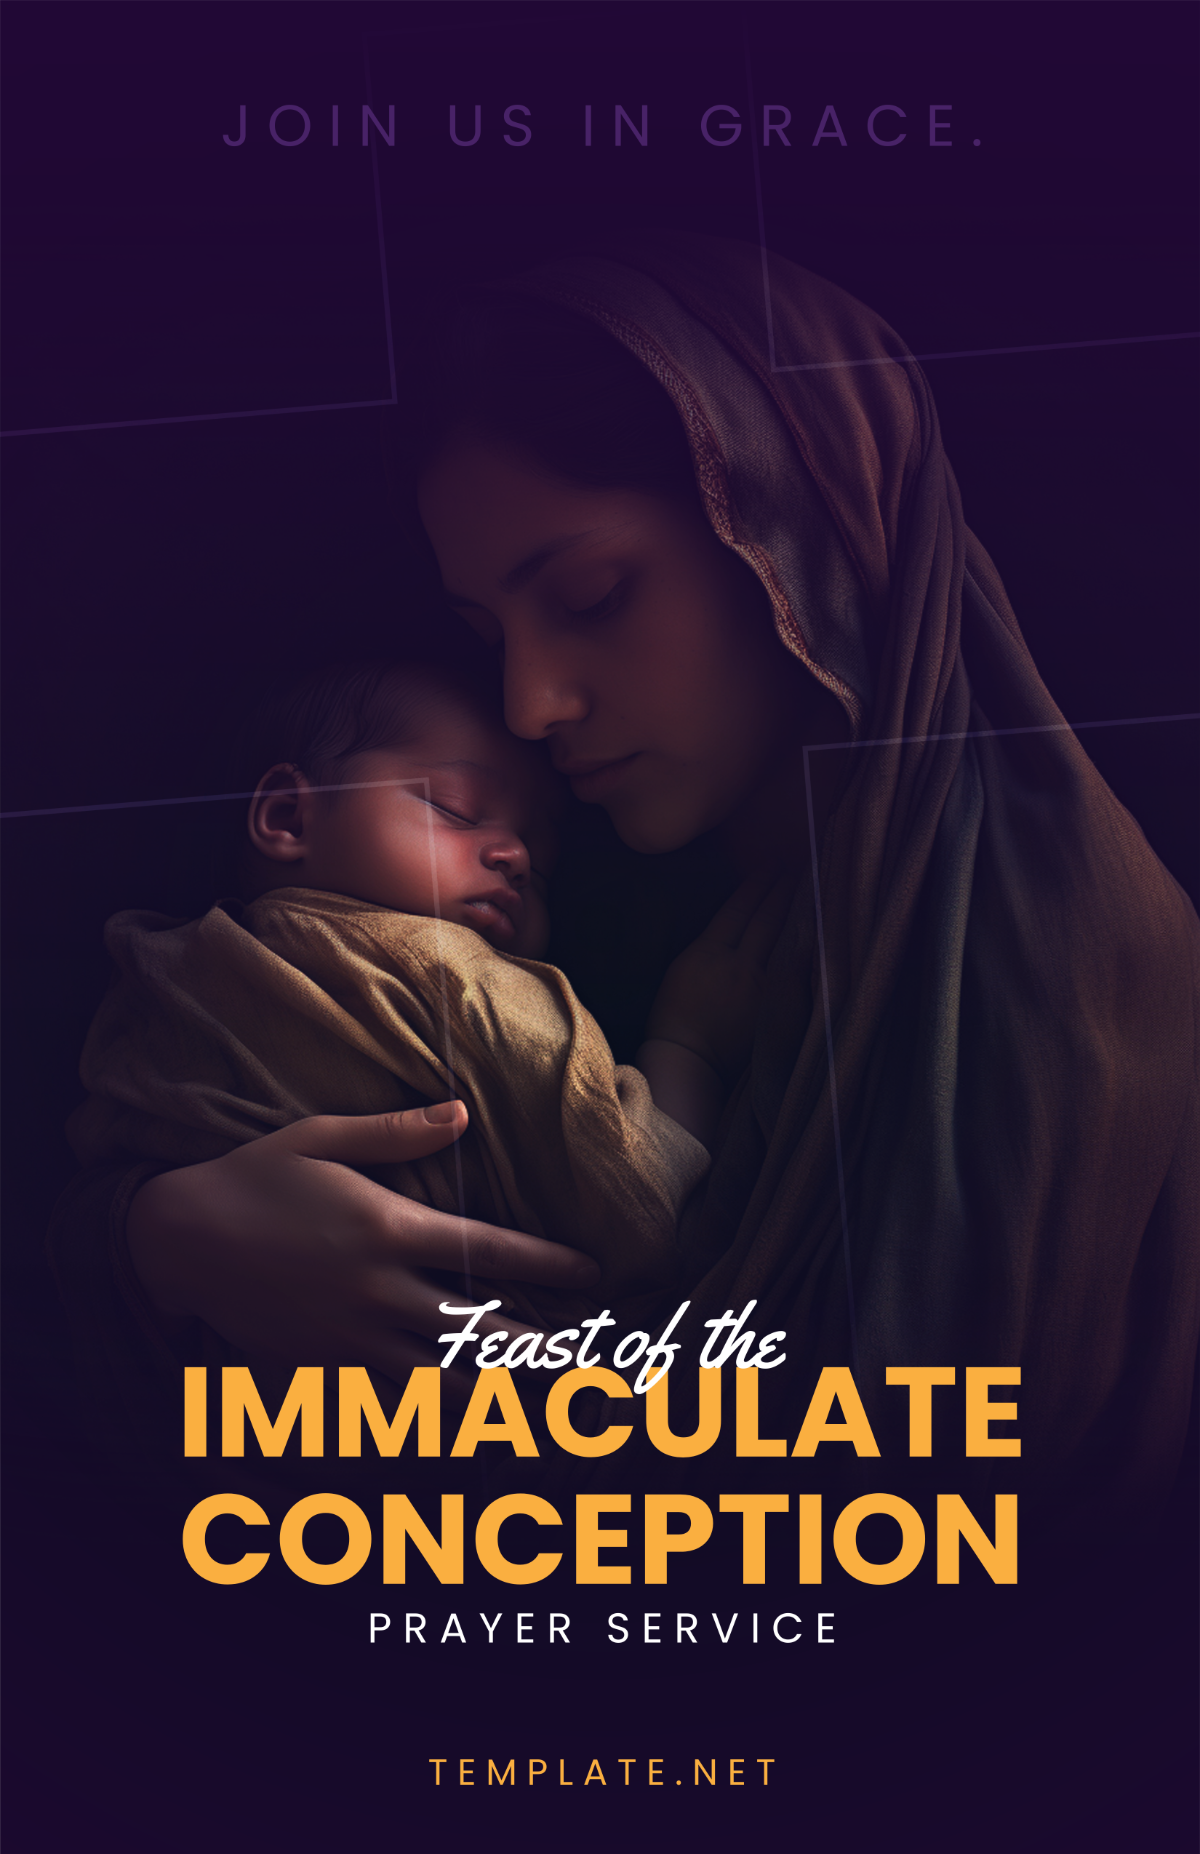 Free Feast of Immaculate Conception Prayer Service Poster Template